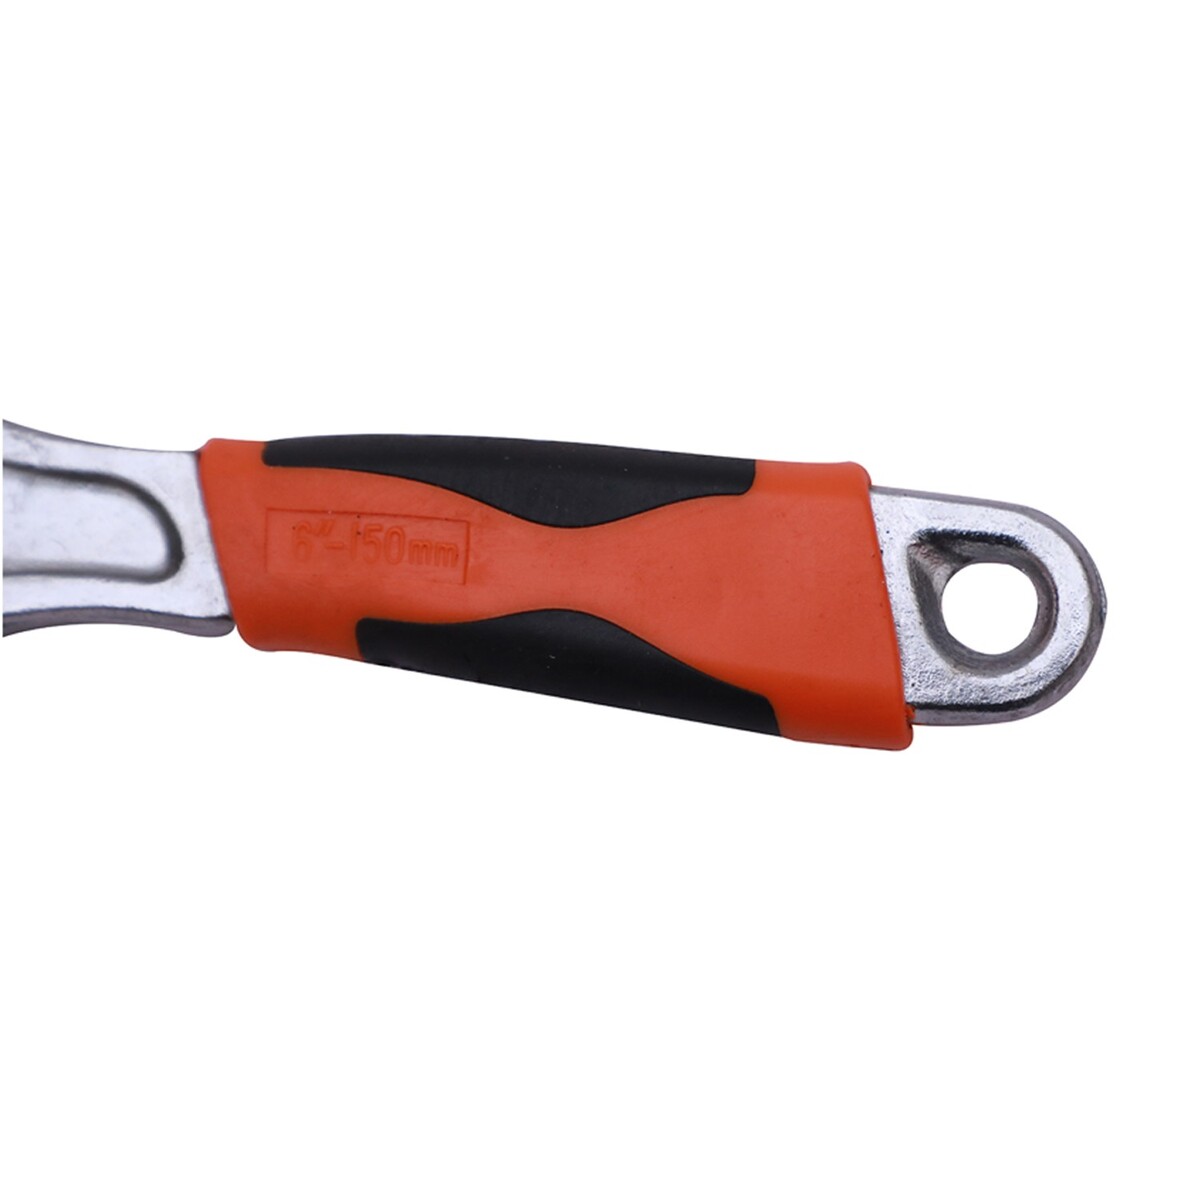 Gomer Adjustable Wrench 6inch 14441-14